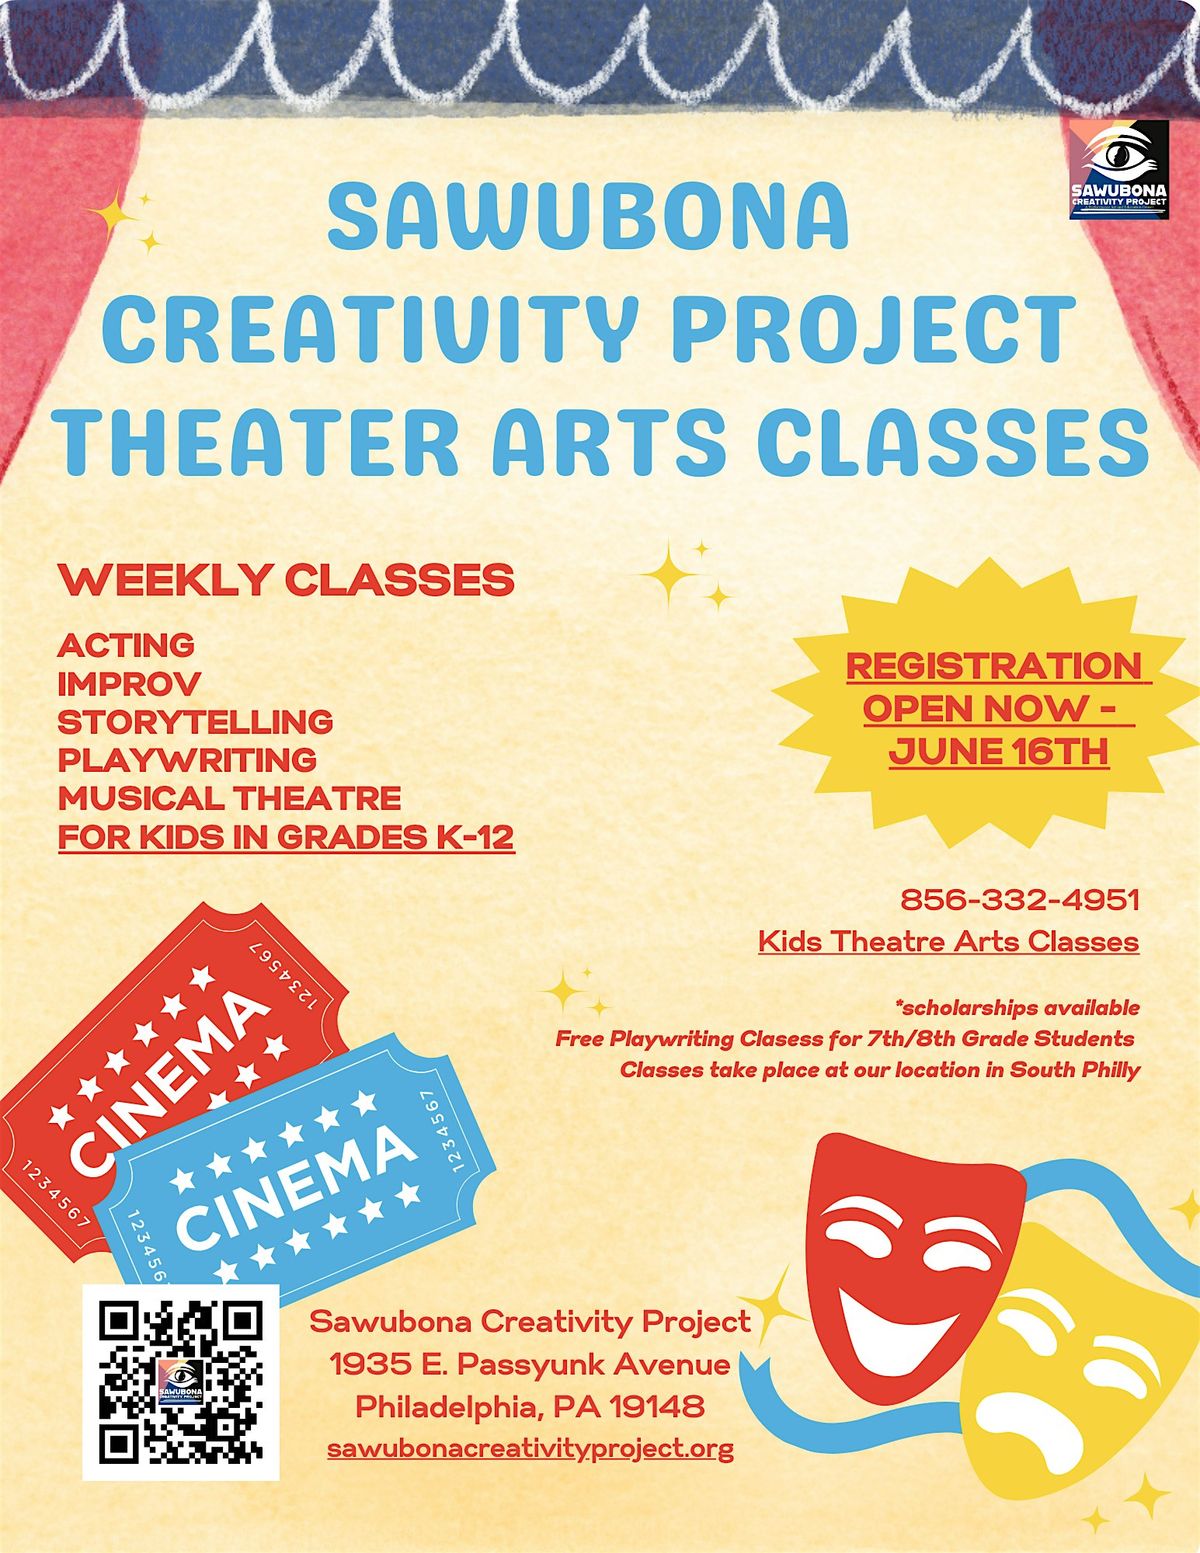 Theatre Arts Classes for Kids and Teens